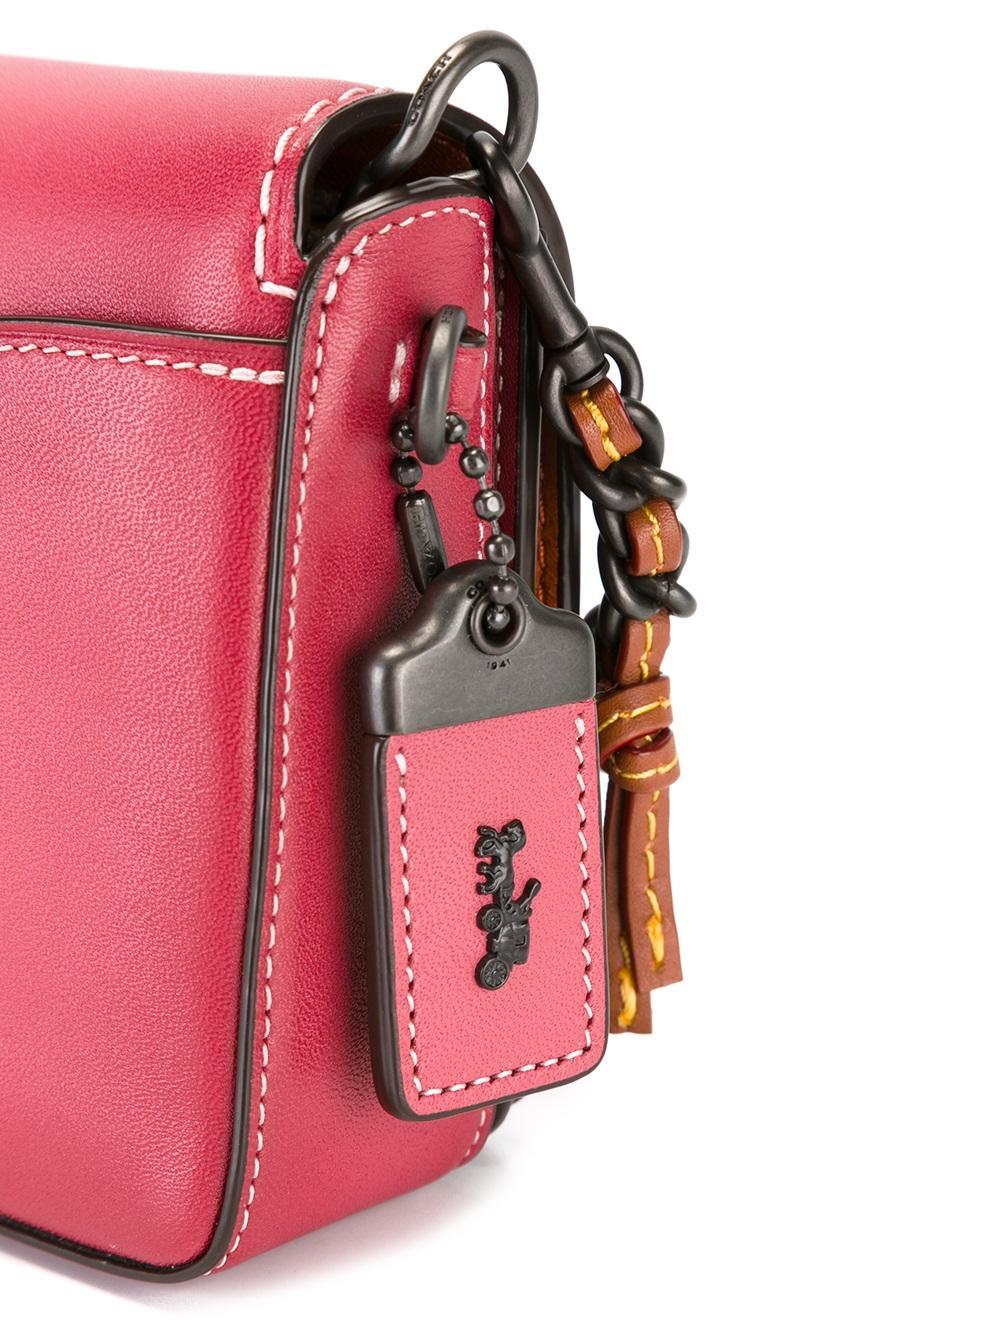 COACH Leather Chain Strap Crossbody Bag in Pink/Purple (Pink) - Lyst